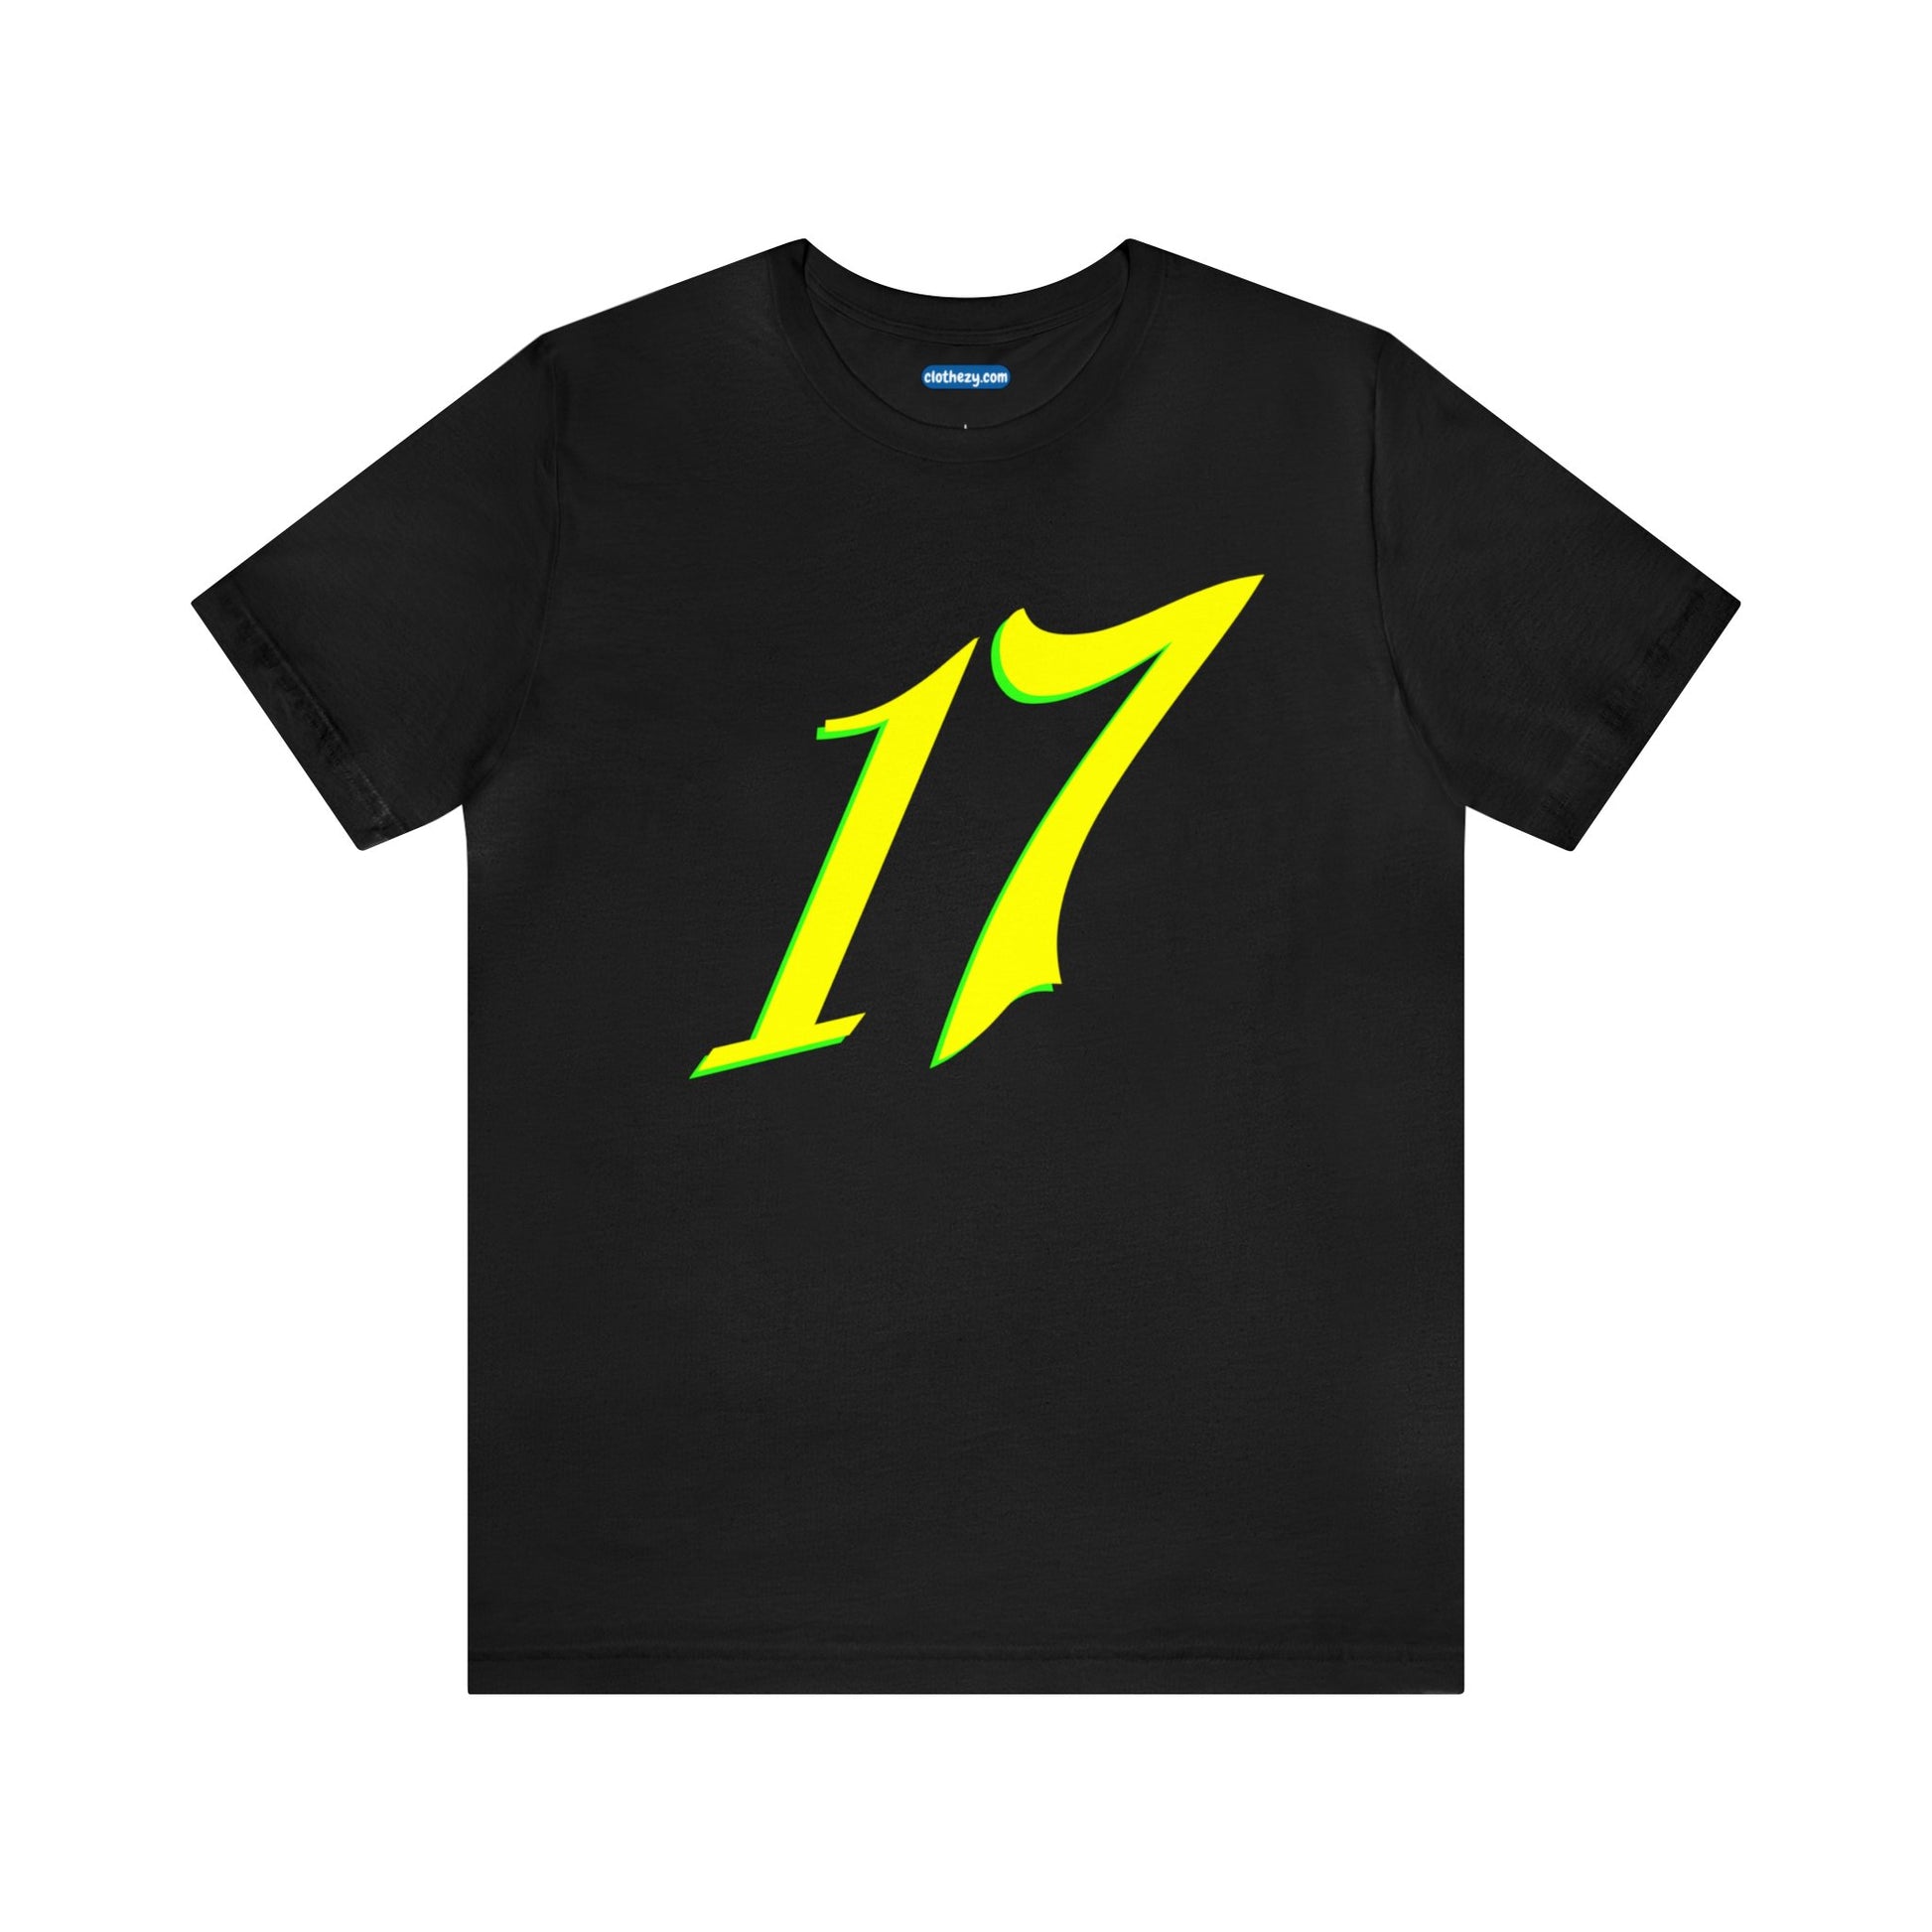 Number 17 Design - Soft Cotton Tee for birthdays and celebrations, Gift for friends and family, Multiple Options by clothezy.com in Dark Grey Heather Size Small - Buy Now